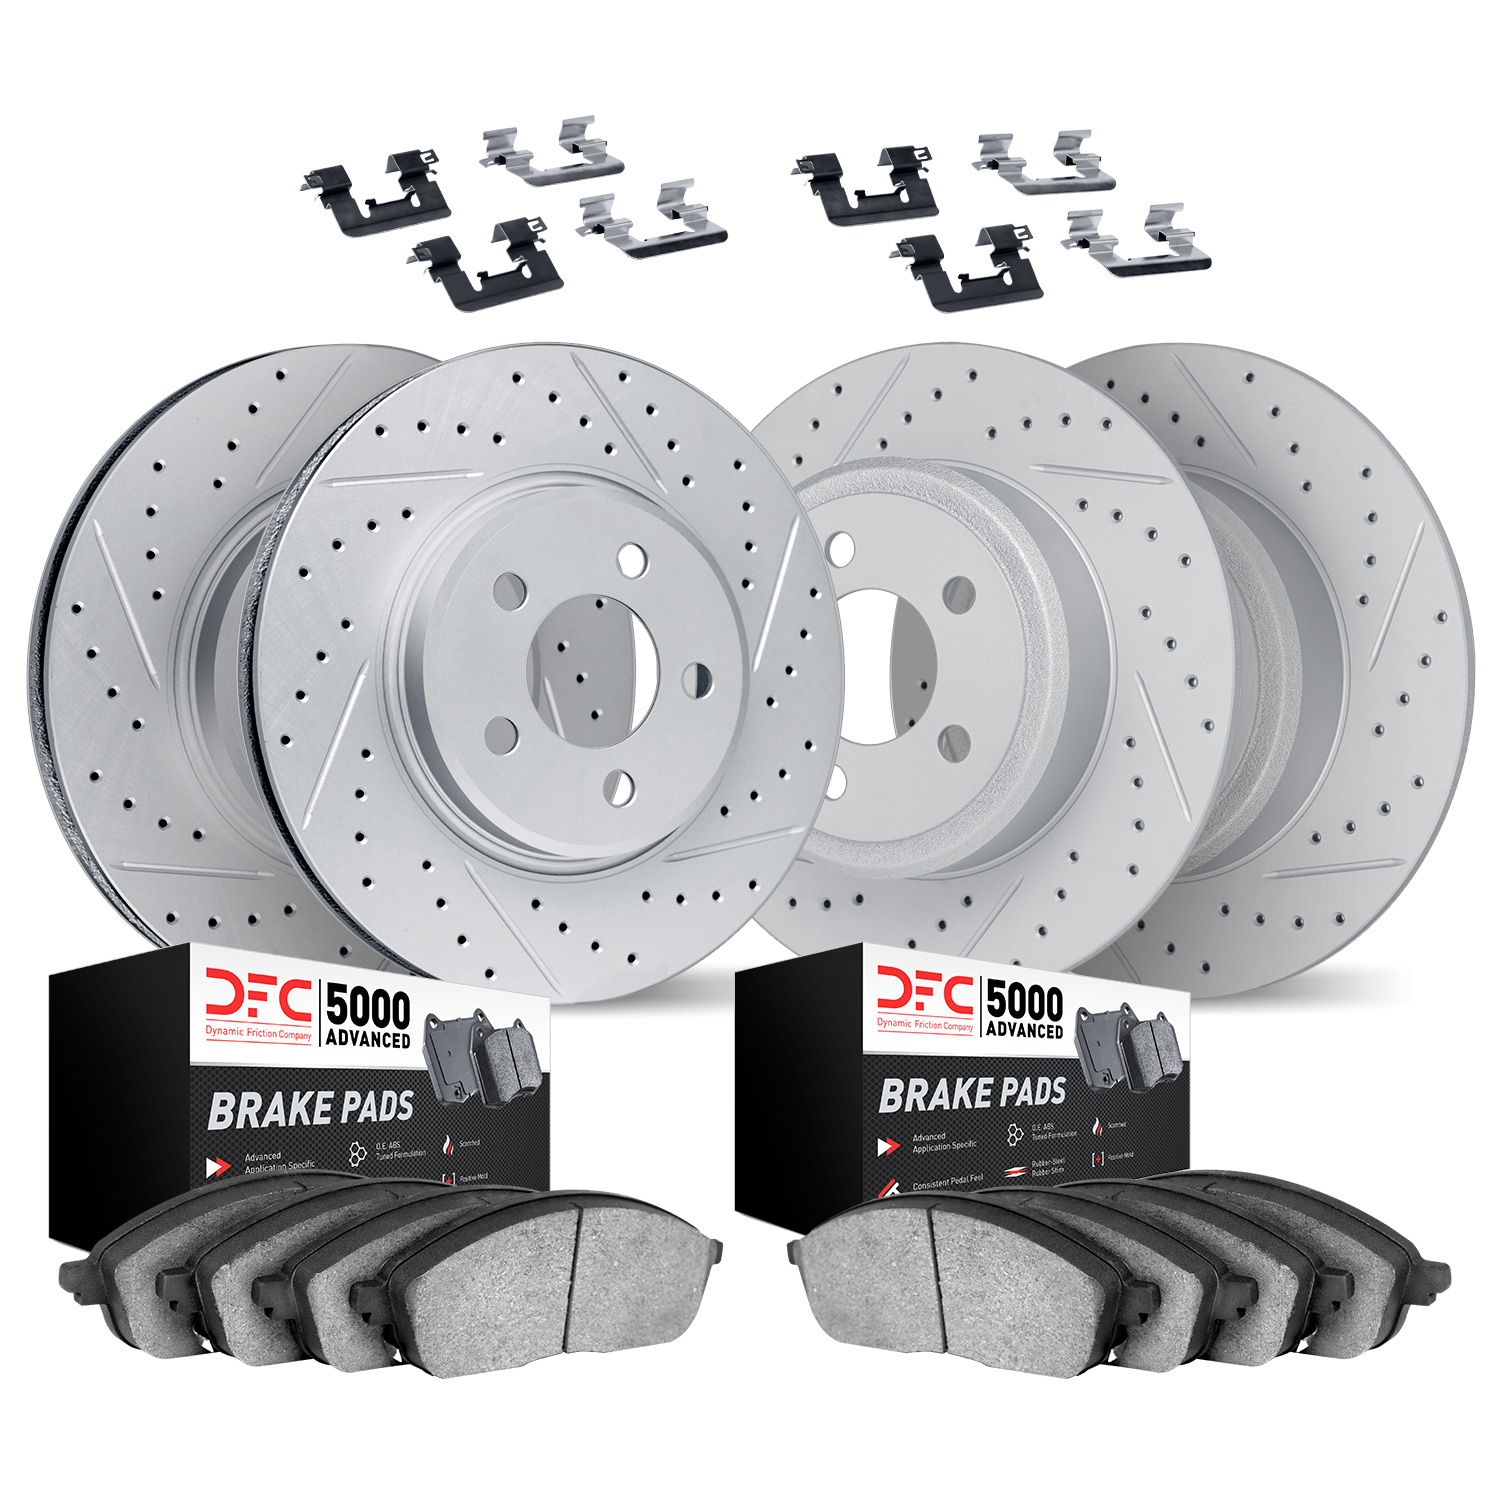 2514-27069 Geoperformance Drilled/Slotted Rotors w/5000 Advanced Brake Pads Kit & Hardware, 2012-2015 Land Rover, Position: Fron